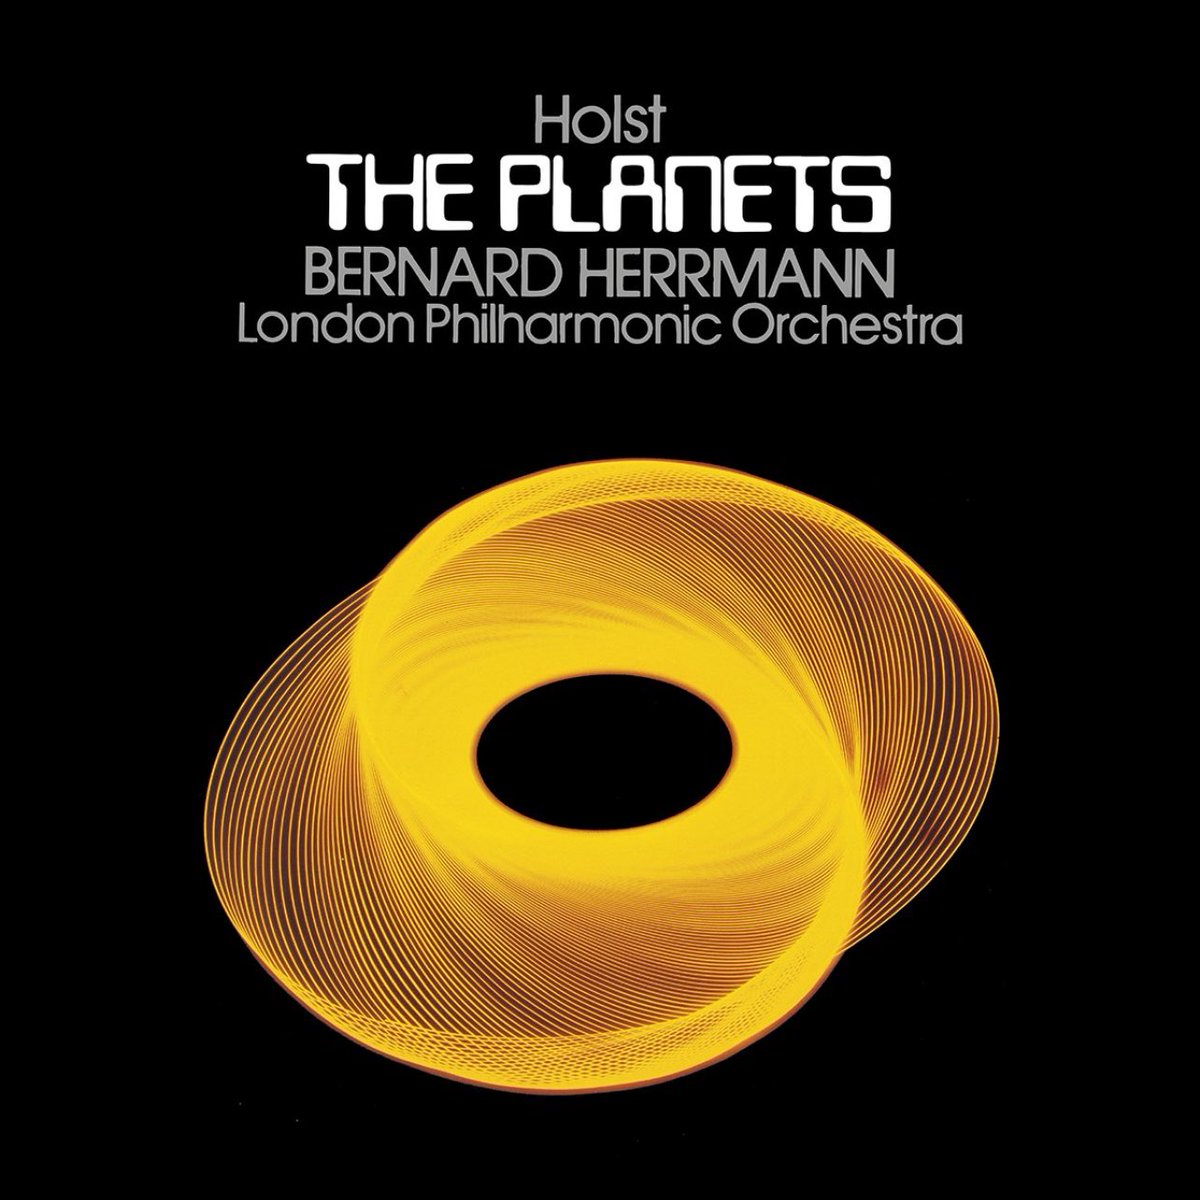 For fans of Holst and Herrmann: @QuartetRecords, in collaboration with Decca Classics and Universal Music Enterprises, presents a remastered CD edition of the unique and controversial Bernard Herrmann recording of Gustav Holst’s THE PLANETS! 🔗: quartetrecords.com/product/the-pl…